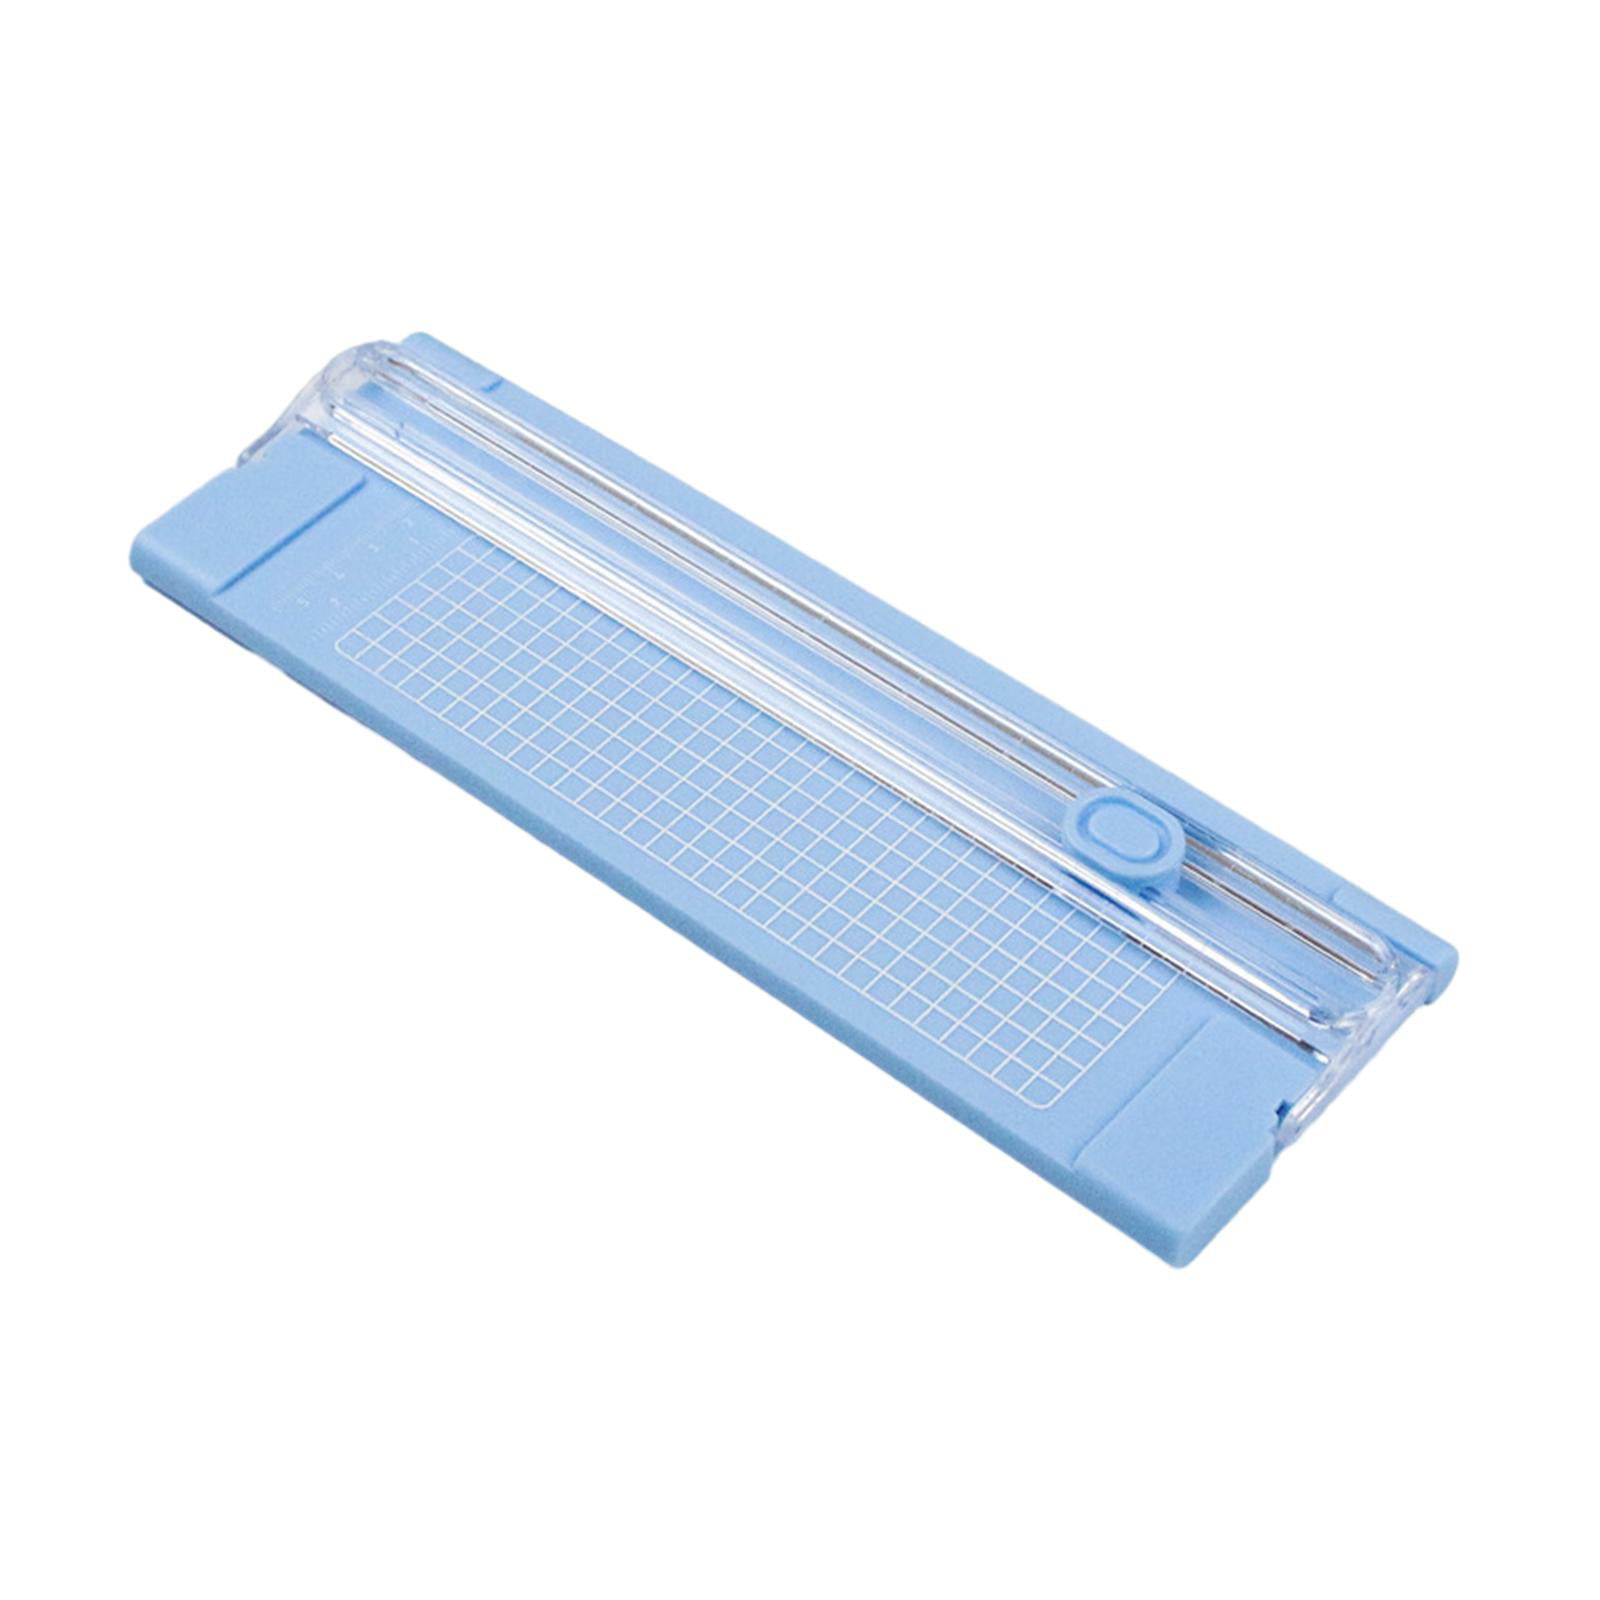 853A4 Paper Cutter Sliding Portable DIY Photo Scrapbook Trimmer for Craft  White ABS,Metal